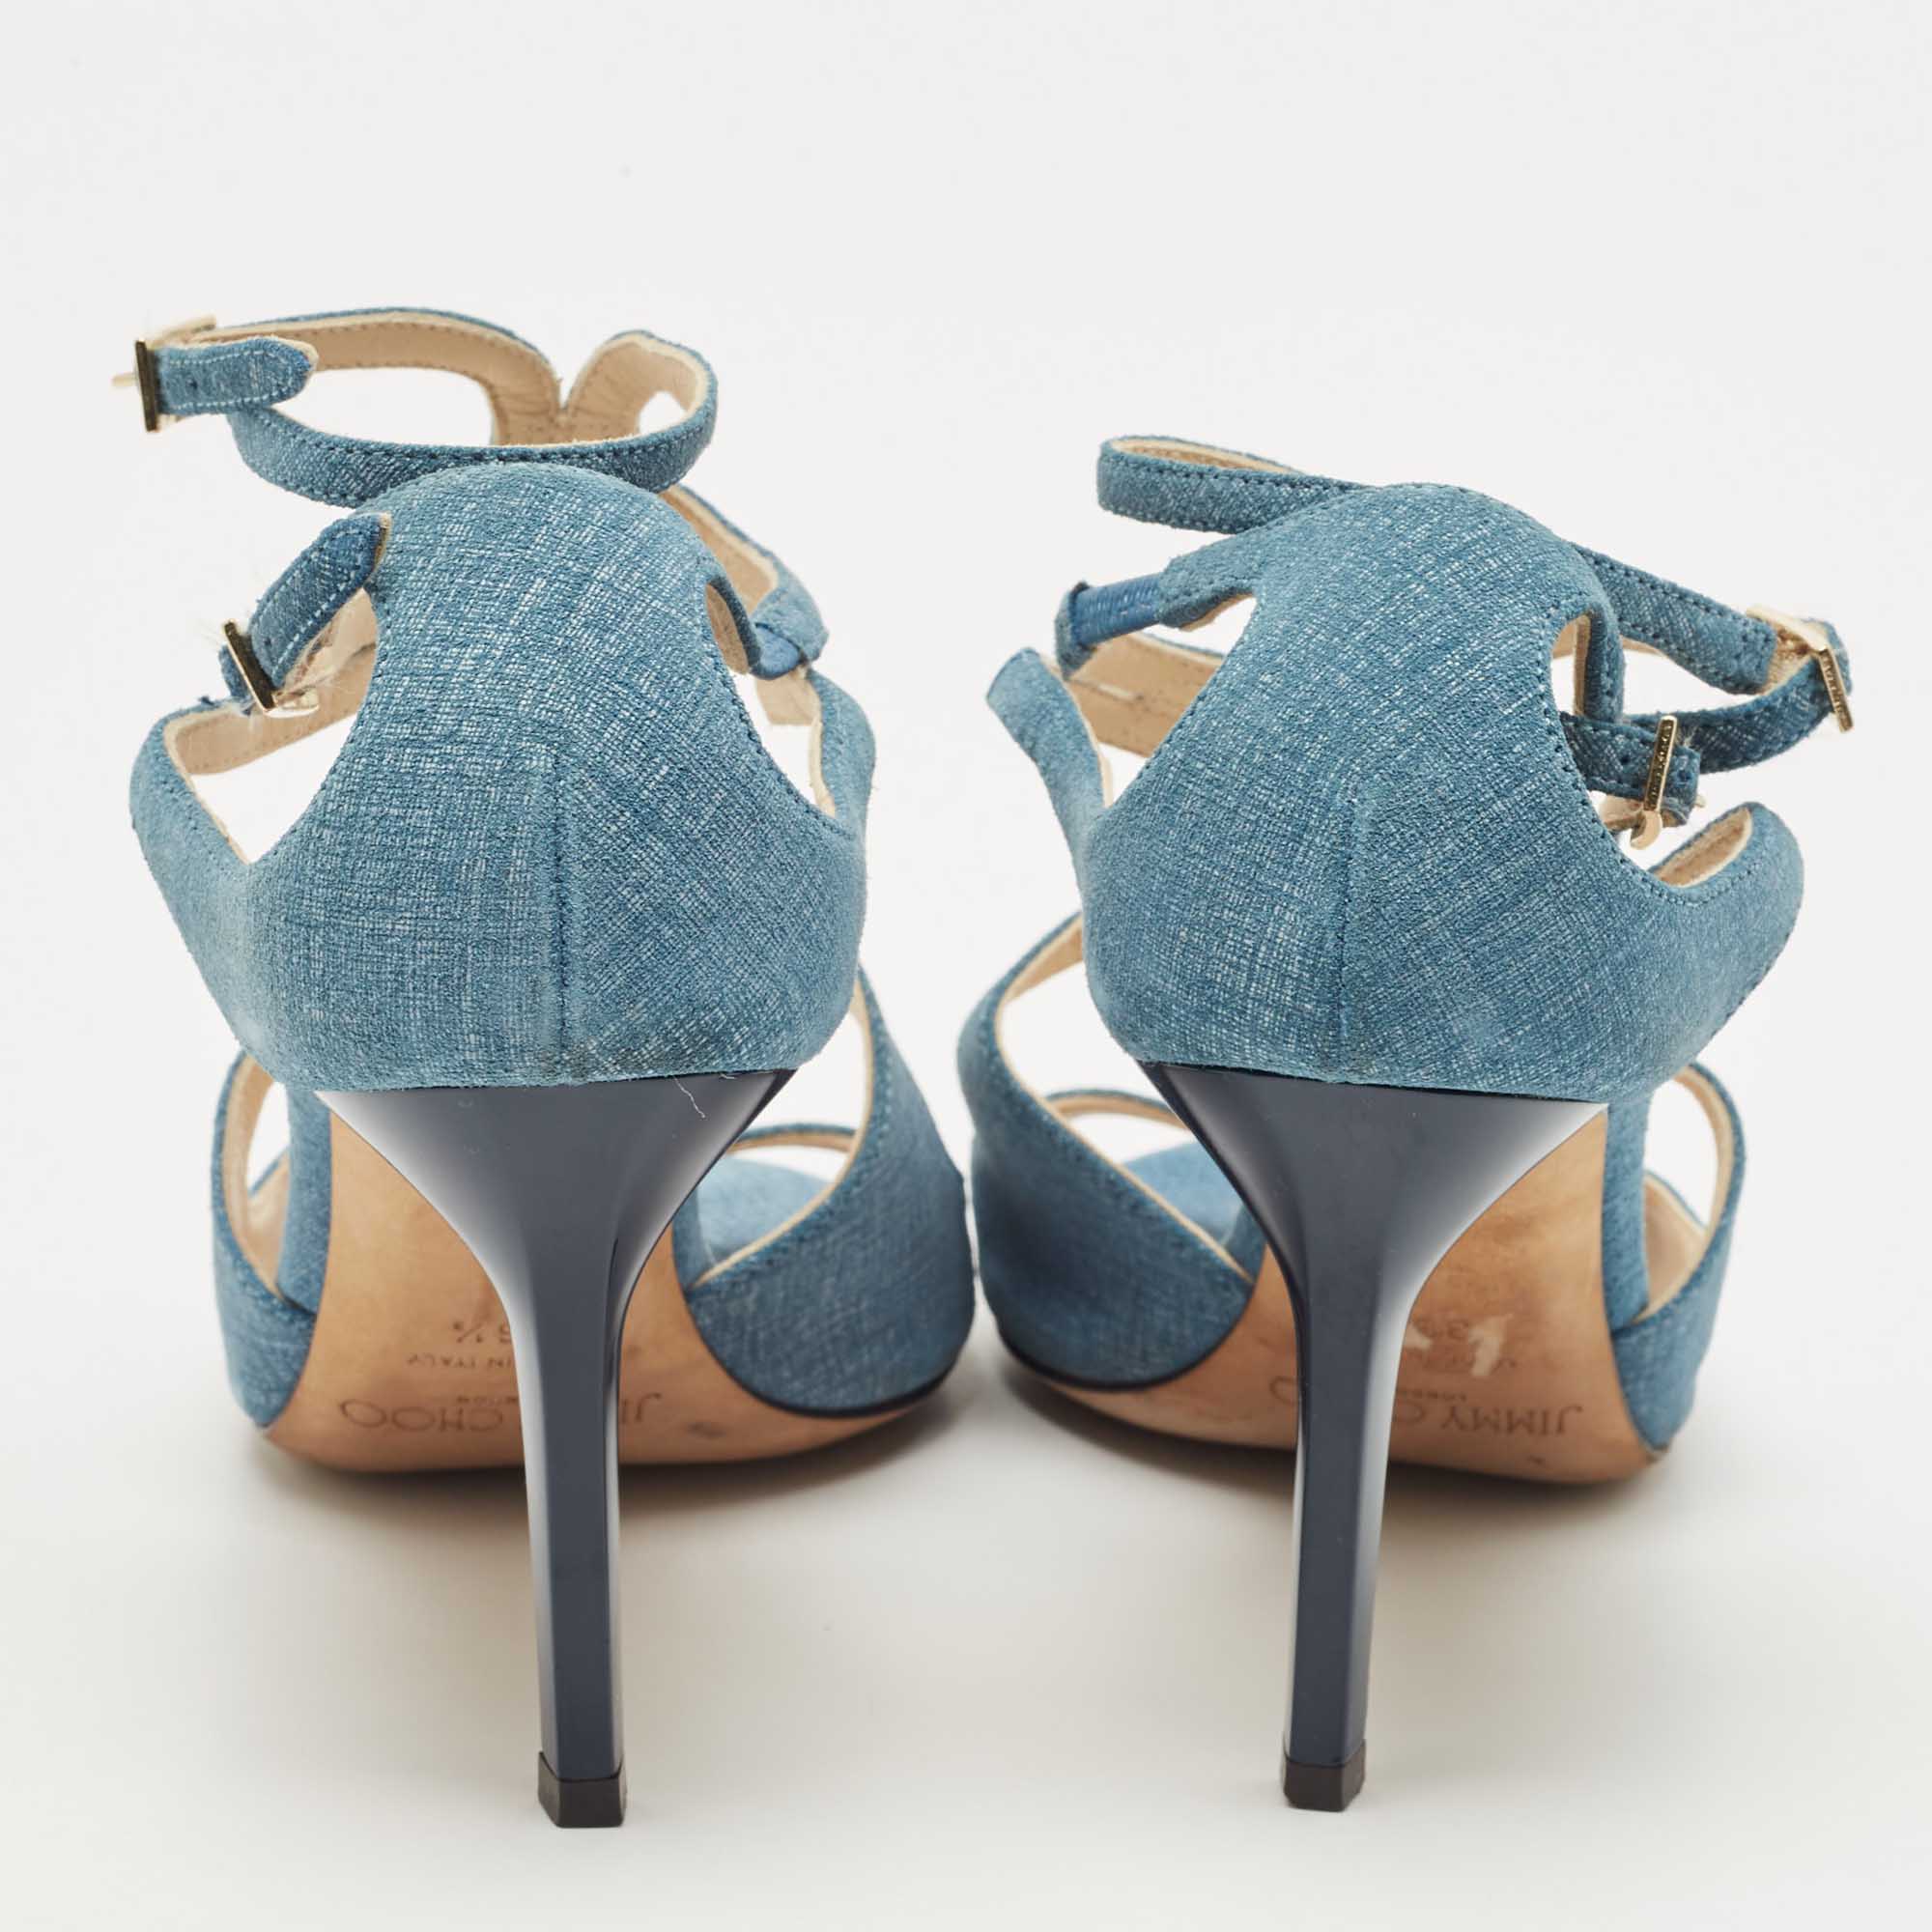 Jimmy Choo Blue Texture Suede Lang Ankle Strap Sandals Size 36.5